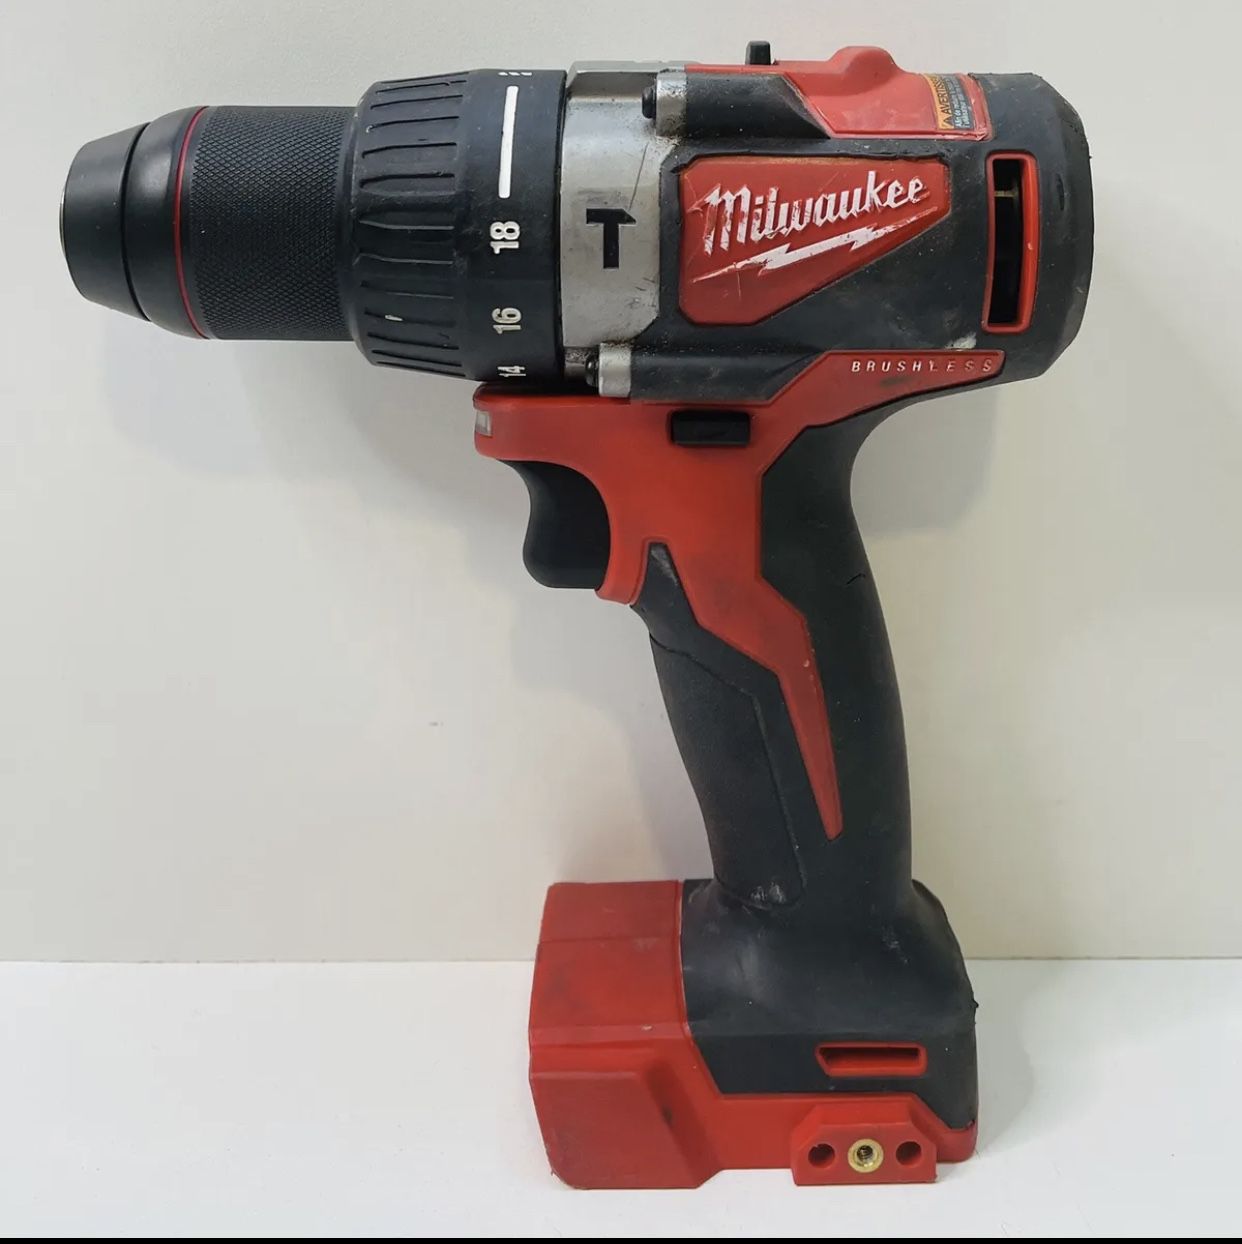 Milwaukee 2902-20 M18 1/2" Compact Brushless Hammer Drill Driver